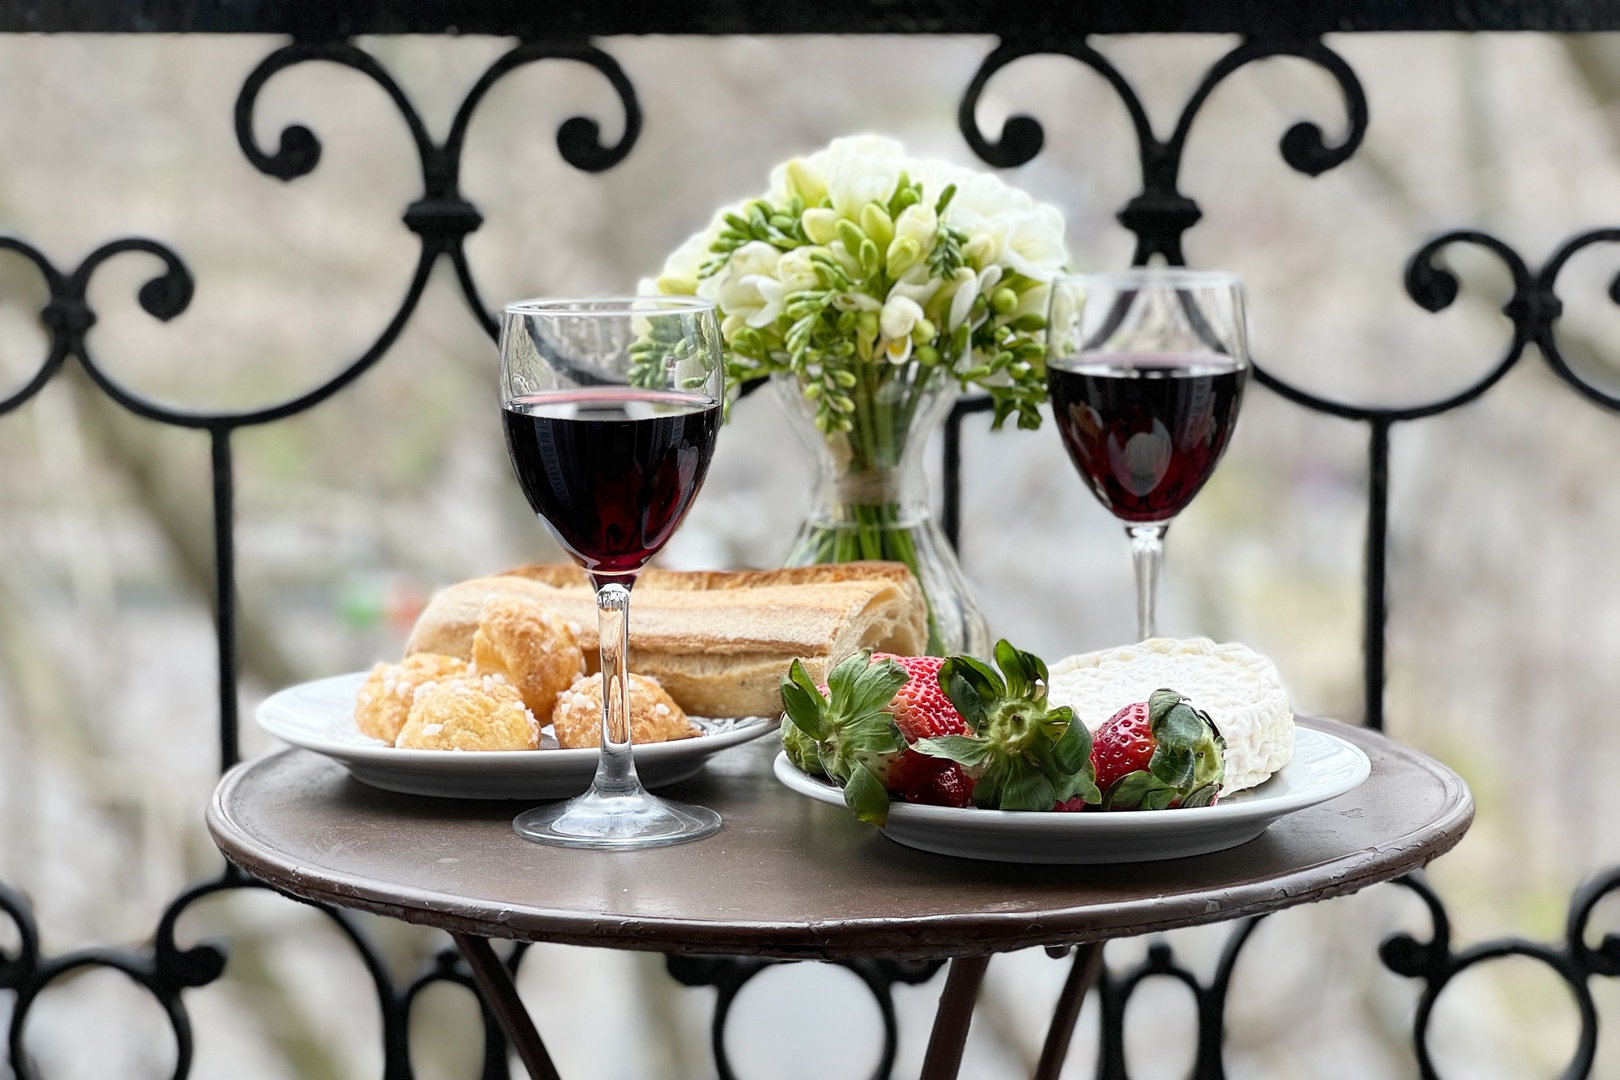 Relax on the balcony with freshly-made French breakfast.